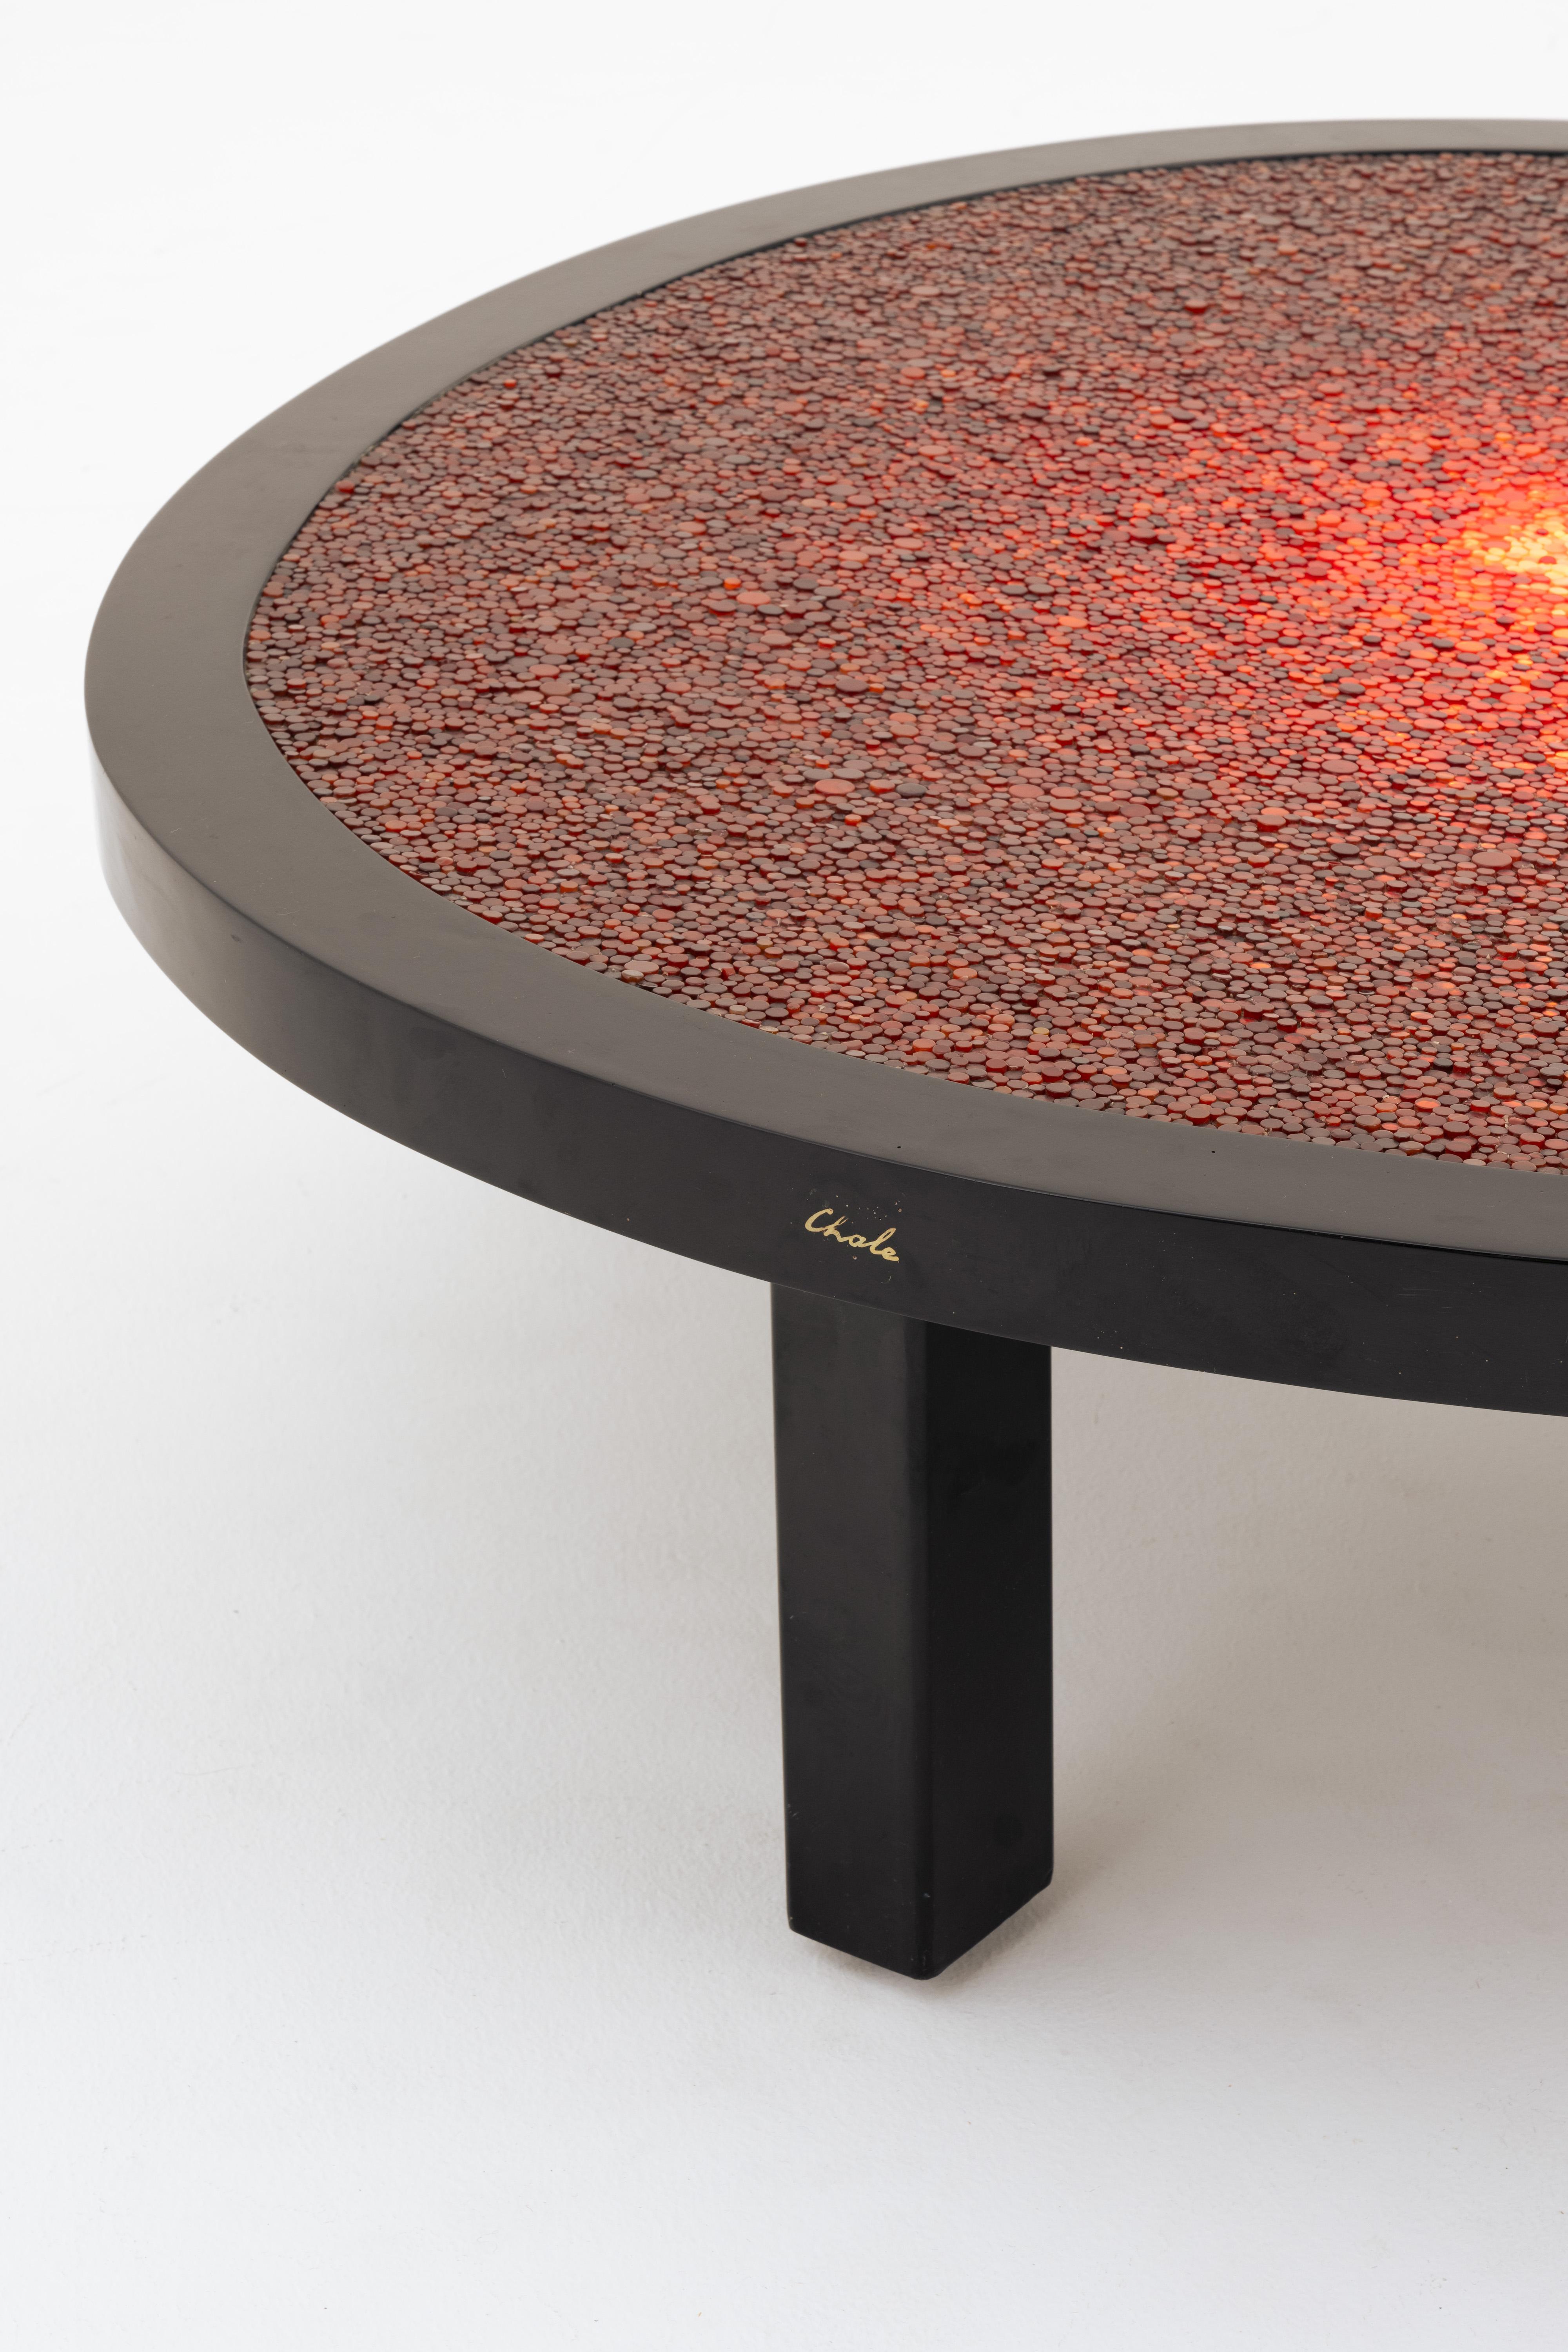 Futurist 1980s Pastilles Illuminating Coffee table by Ado Chale For Sale